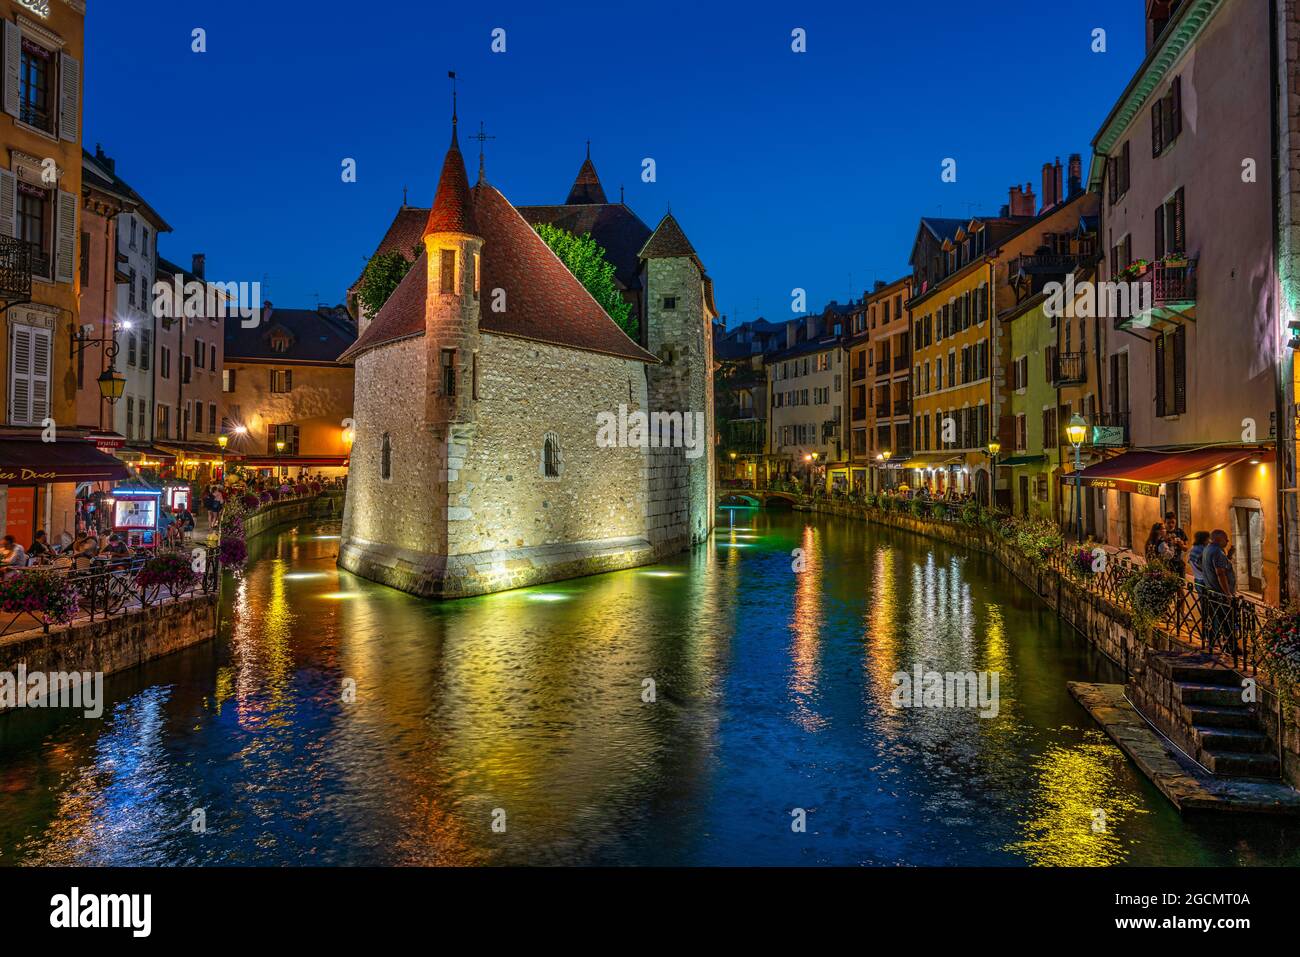 The old prisons of the city of Annecy have now become a tourist attraction. Along the canals, cafes and restaurants abound. Annecy, France Stock Photo